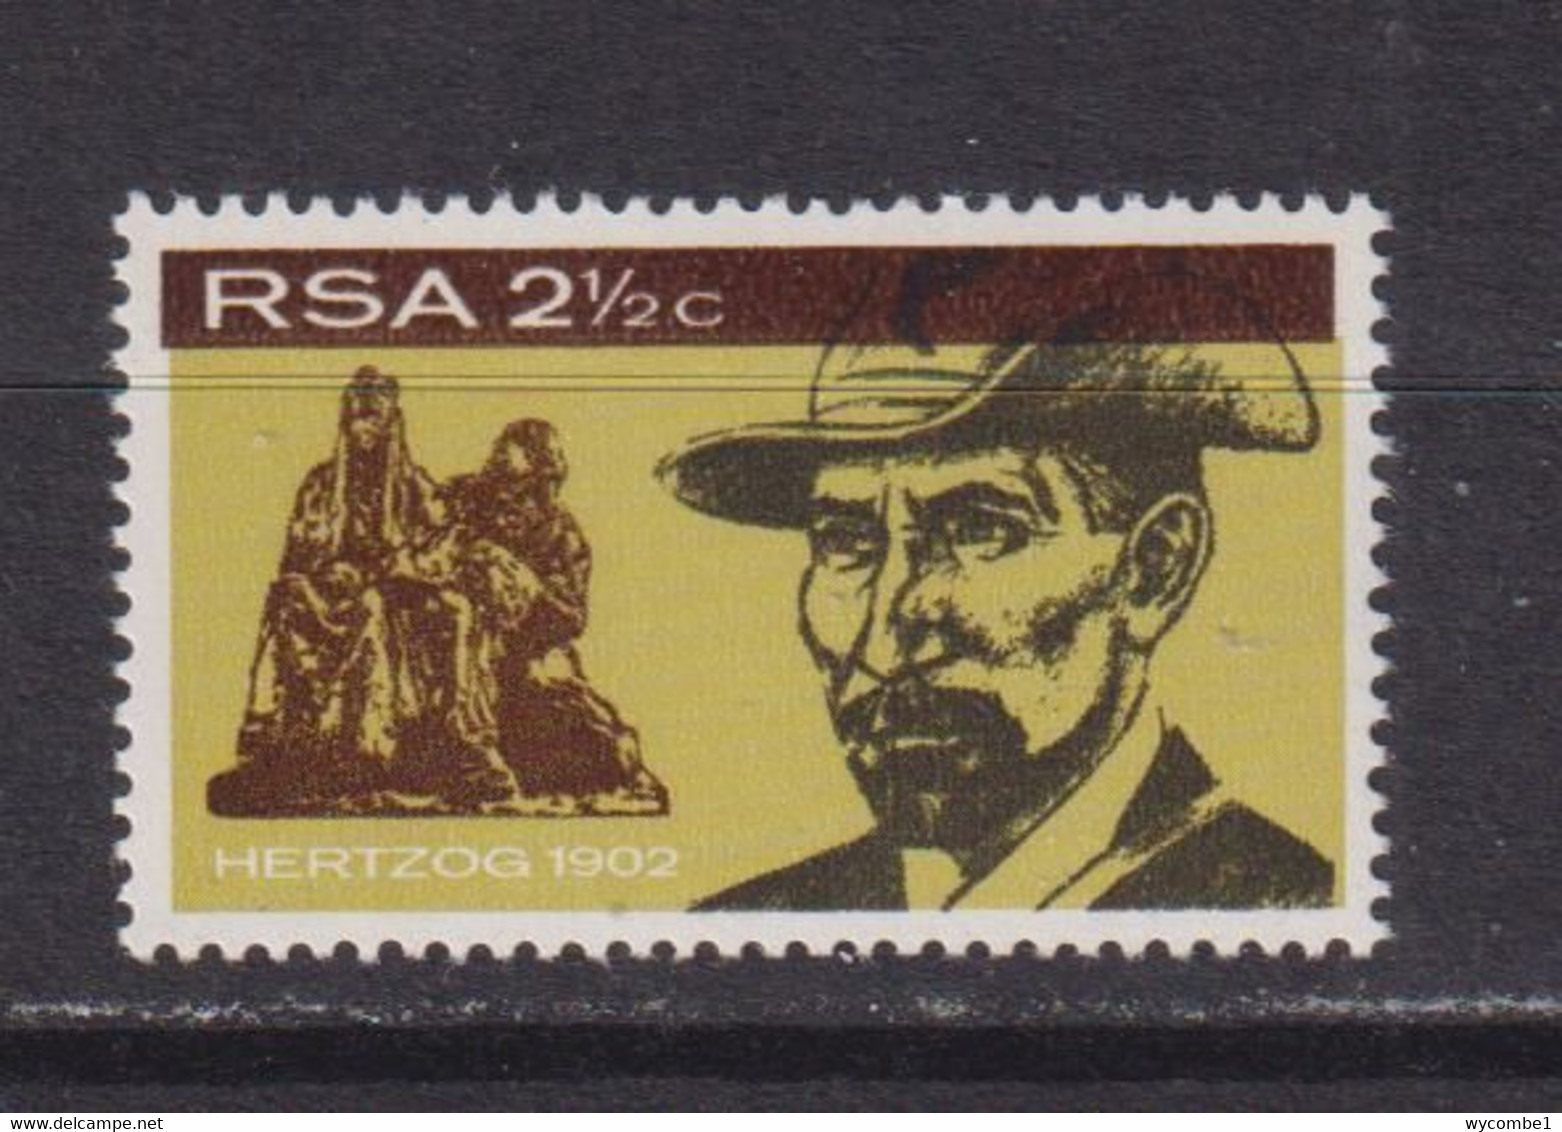 SOUTH AFRICA - 1968 Hertzog 21/2c Never Hinged Mint - Unused Stamps